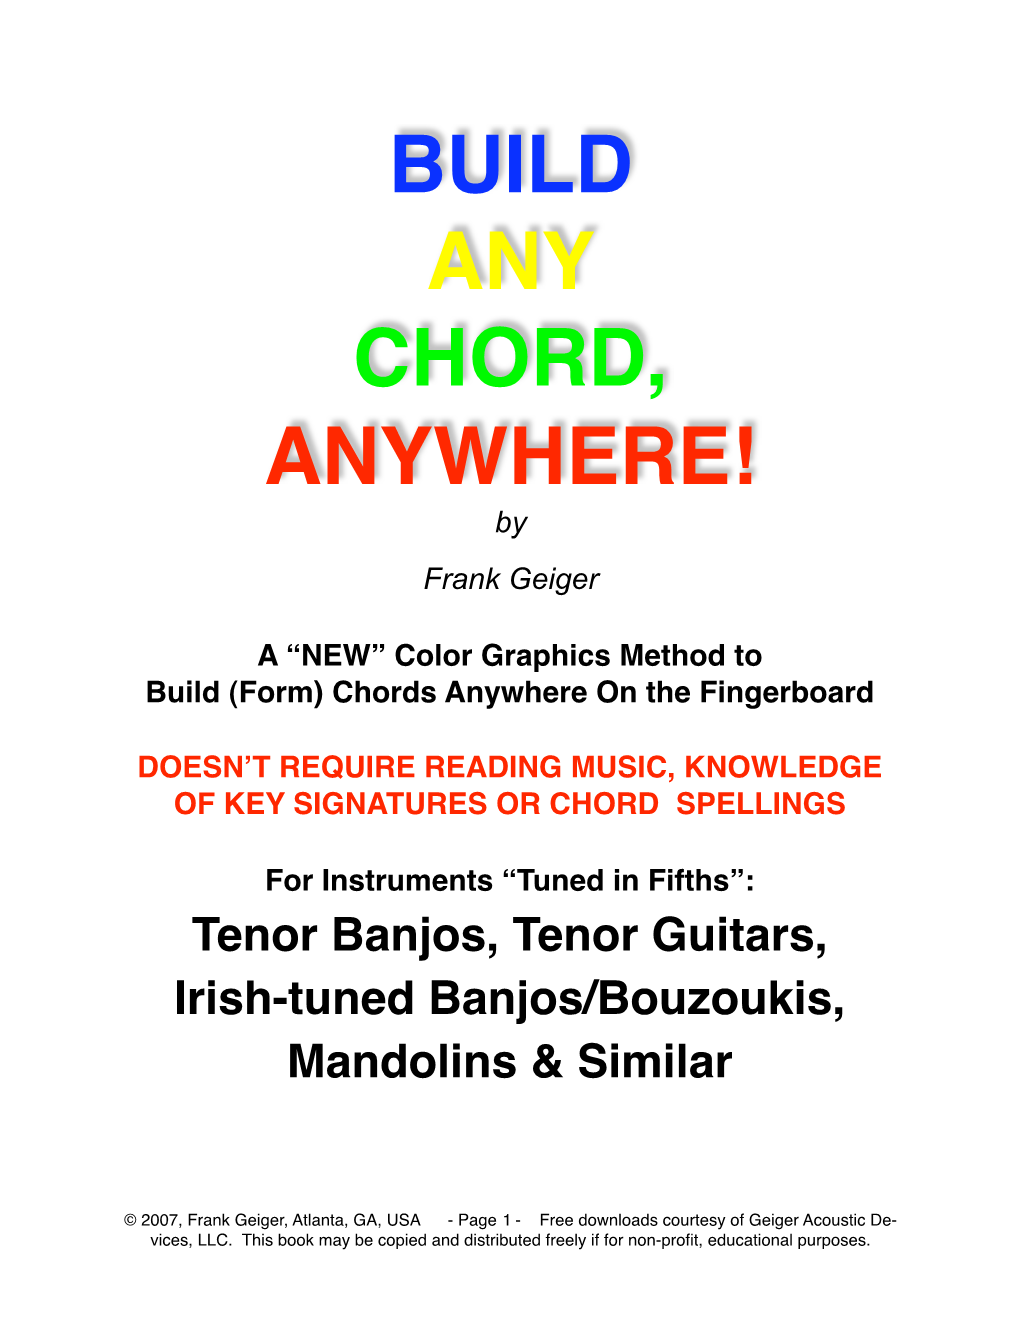 BUILD ANY CHORD, ANYWHERE! by Frank Geiger